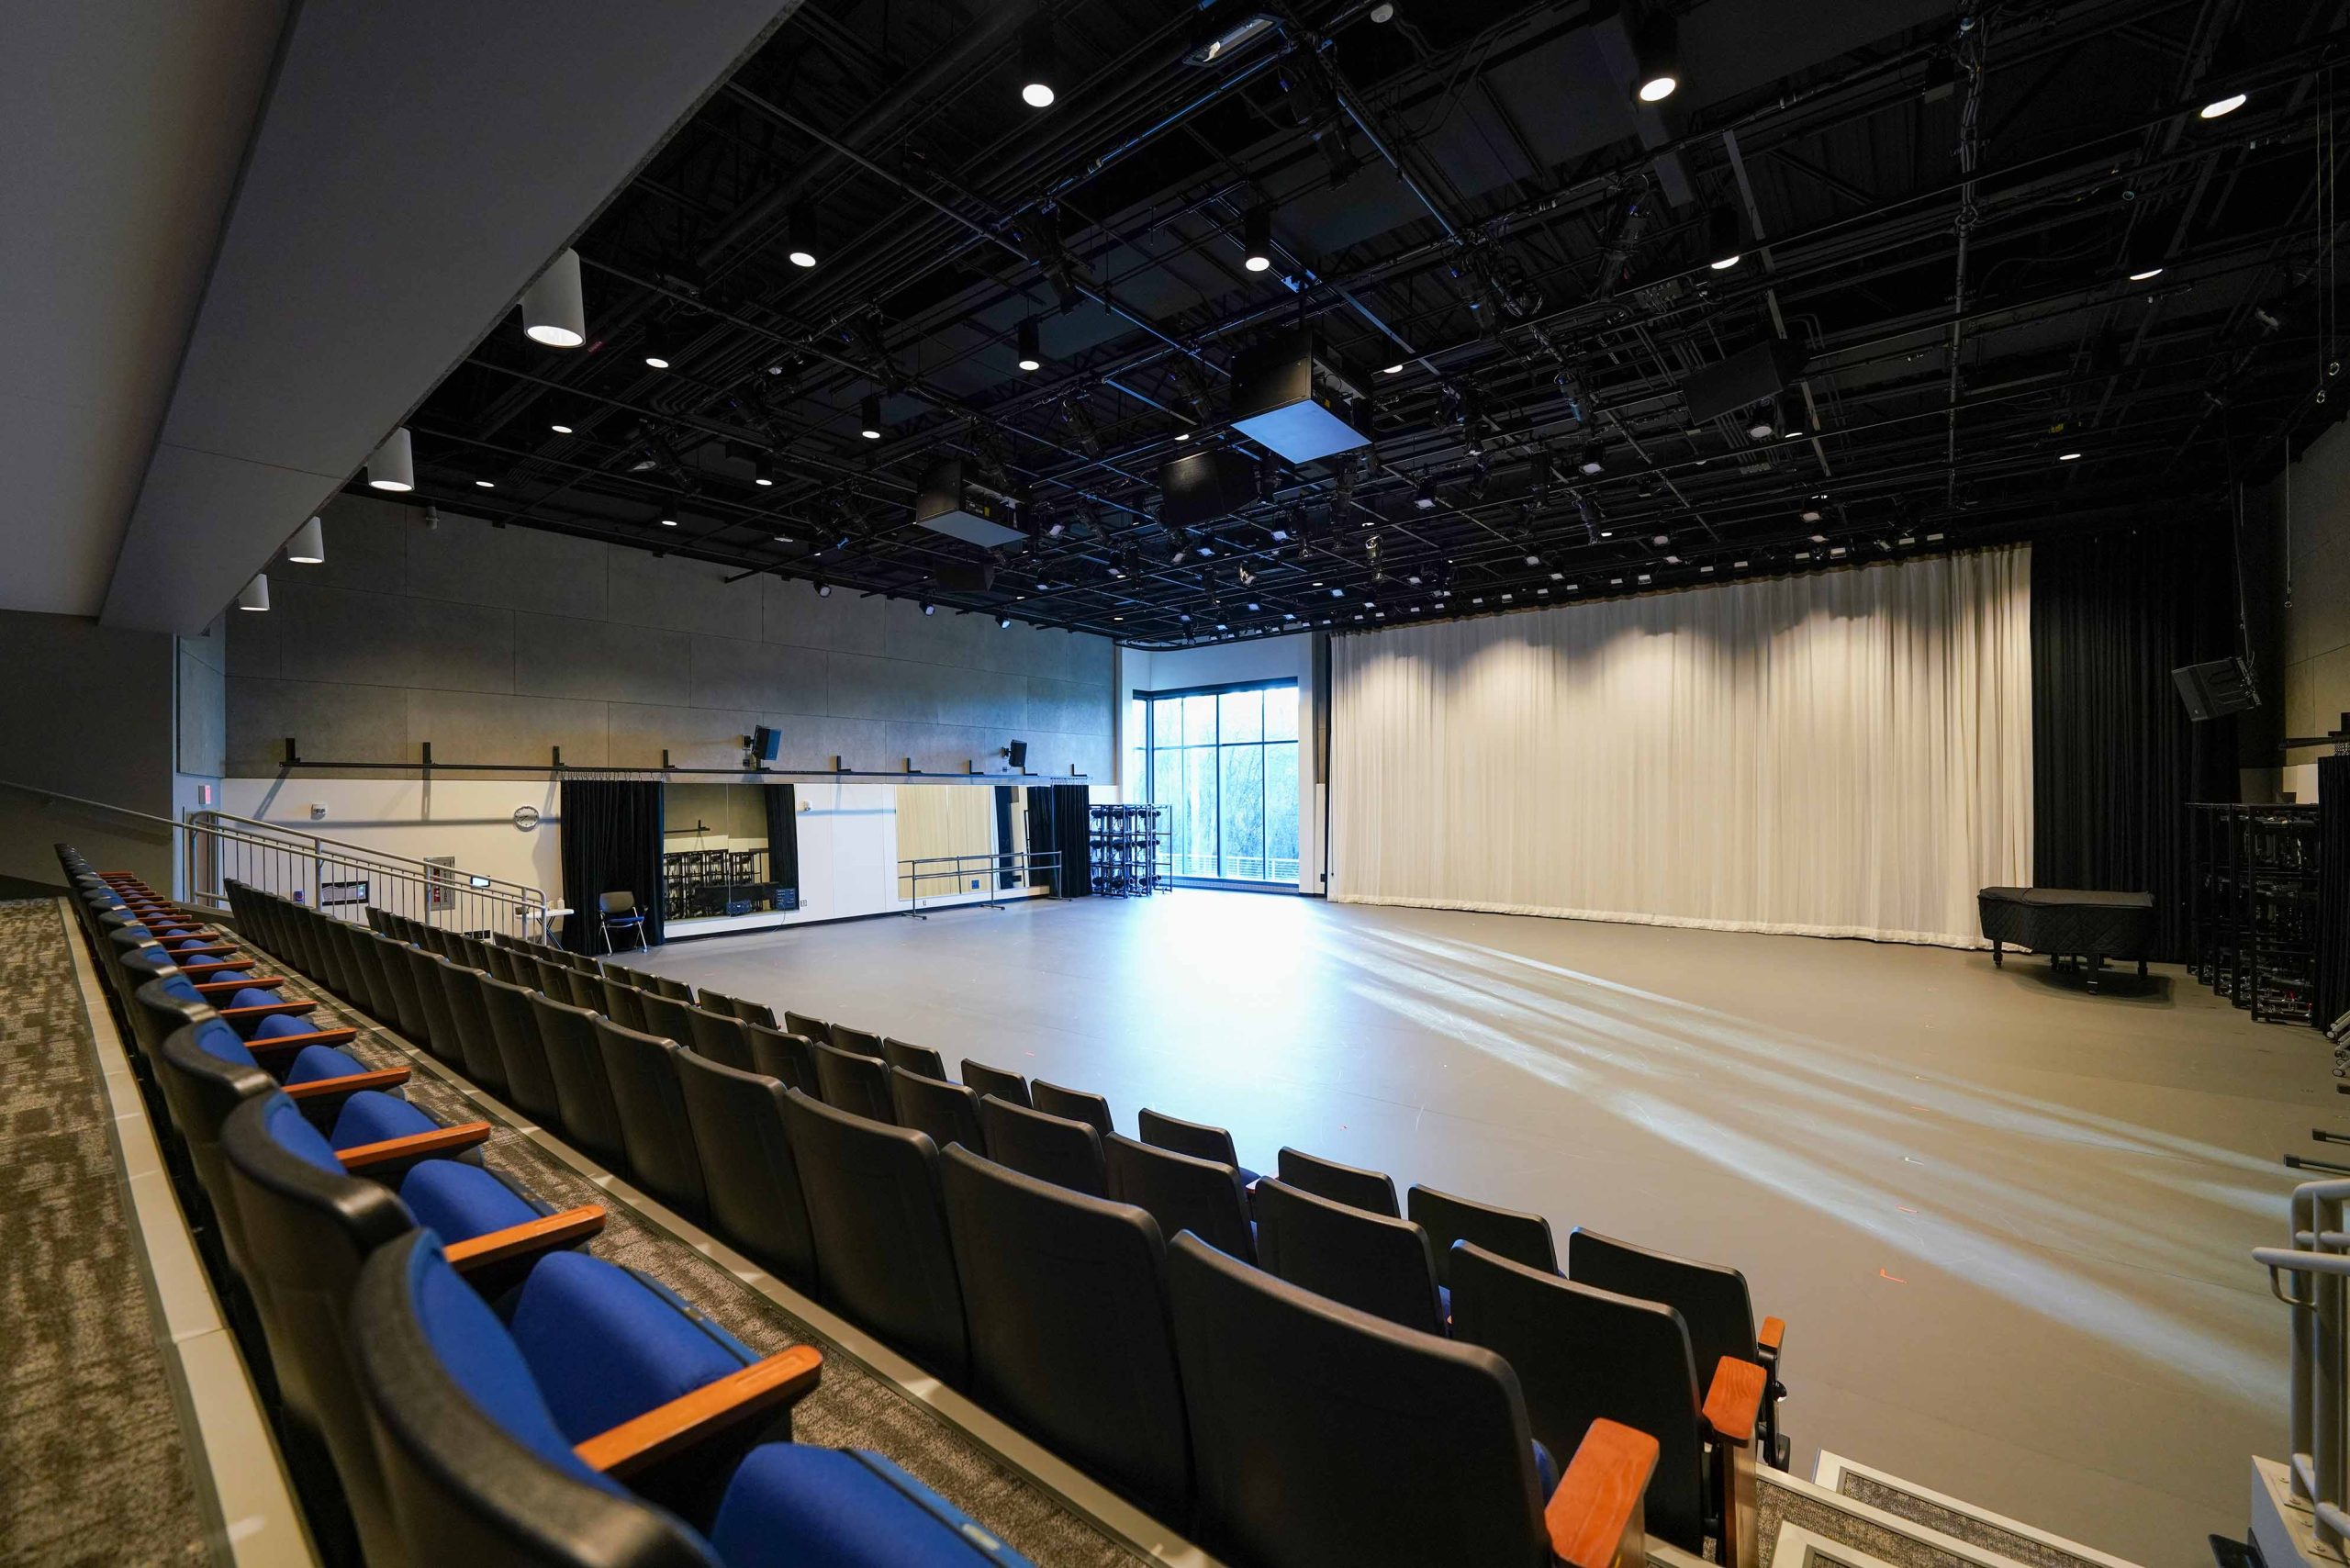 Two rows of seating overlook a studio with tall windows partially covered by white curtains.